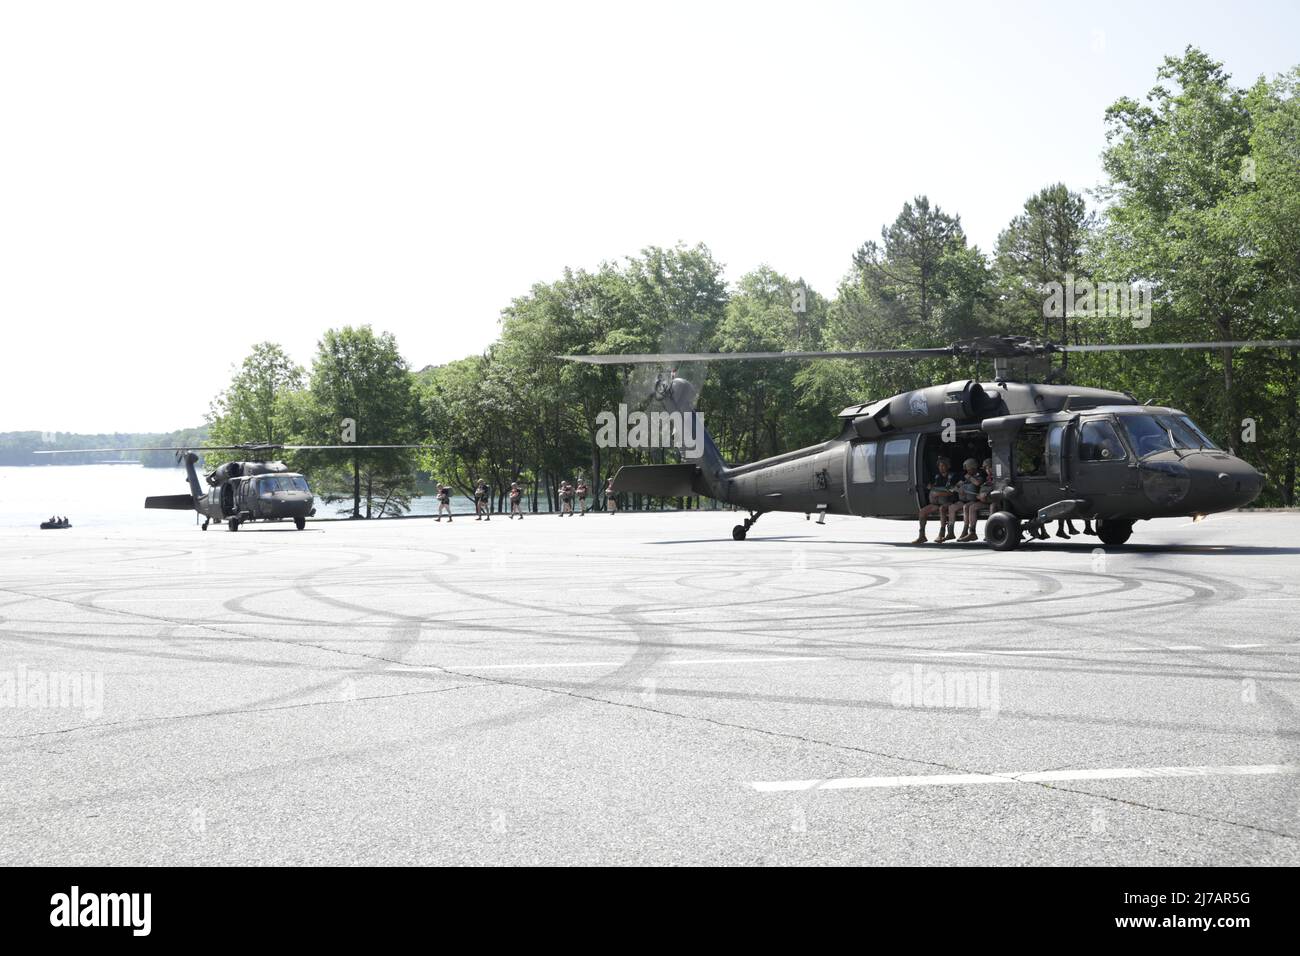 A group of U.S Army Rangers, assigned to the 5th Ranger Training Battalion, in an UH-60 aircraft prepares to conduct a water jump into Lake Lanier at War Hill Park, Dawnsonville, Ga., May 5, 2022. The annual training event, hosted by the 5th Ranger Training Battalion, gives Rangers an opportunity to become proficient in water landings, while giving the local community a chance to see the Rangers train in the Lake Lanier area. (U.S. Army Reserve photo by Sgt. Kelson Brooks) Stock Photo